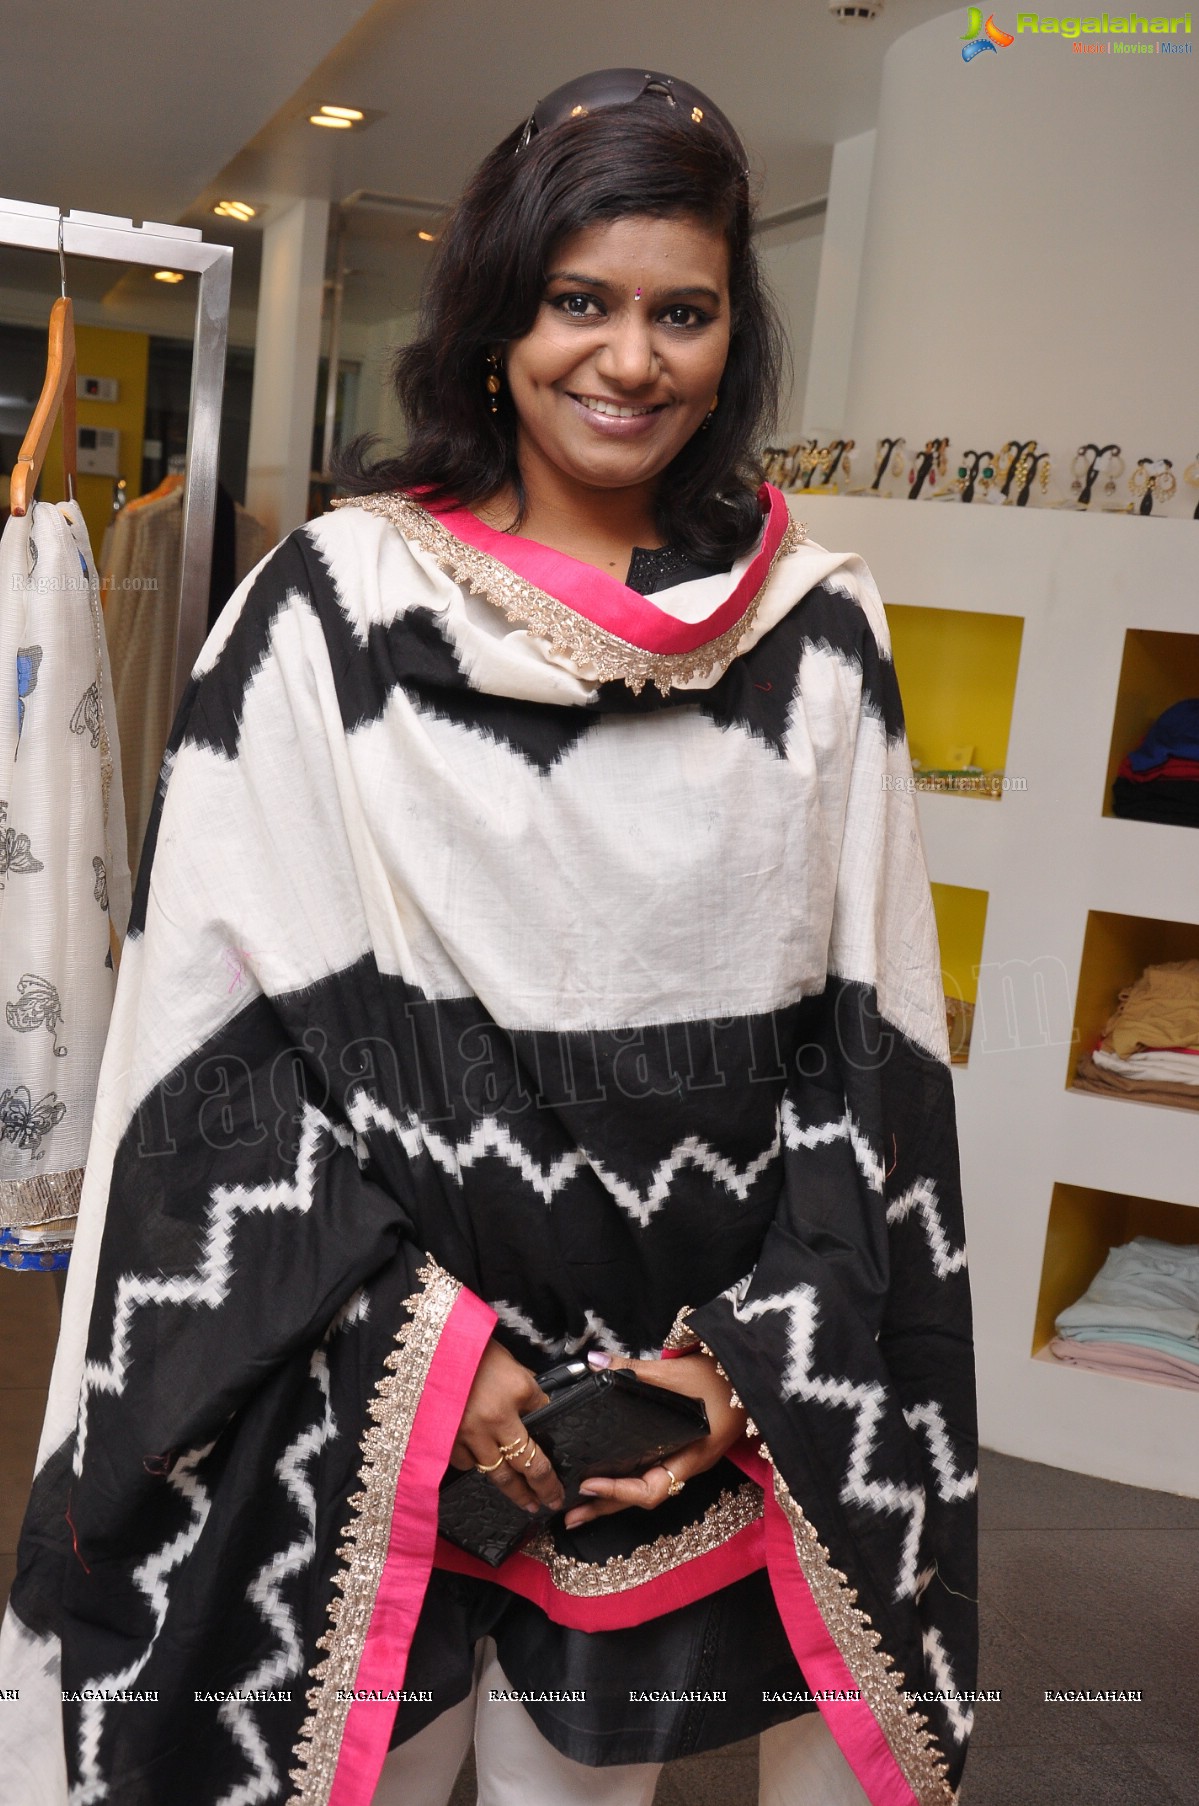 Launch of Signature Brand and Label of Clothes by Fashion Designer Deepti Rajesh